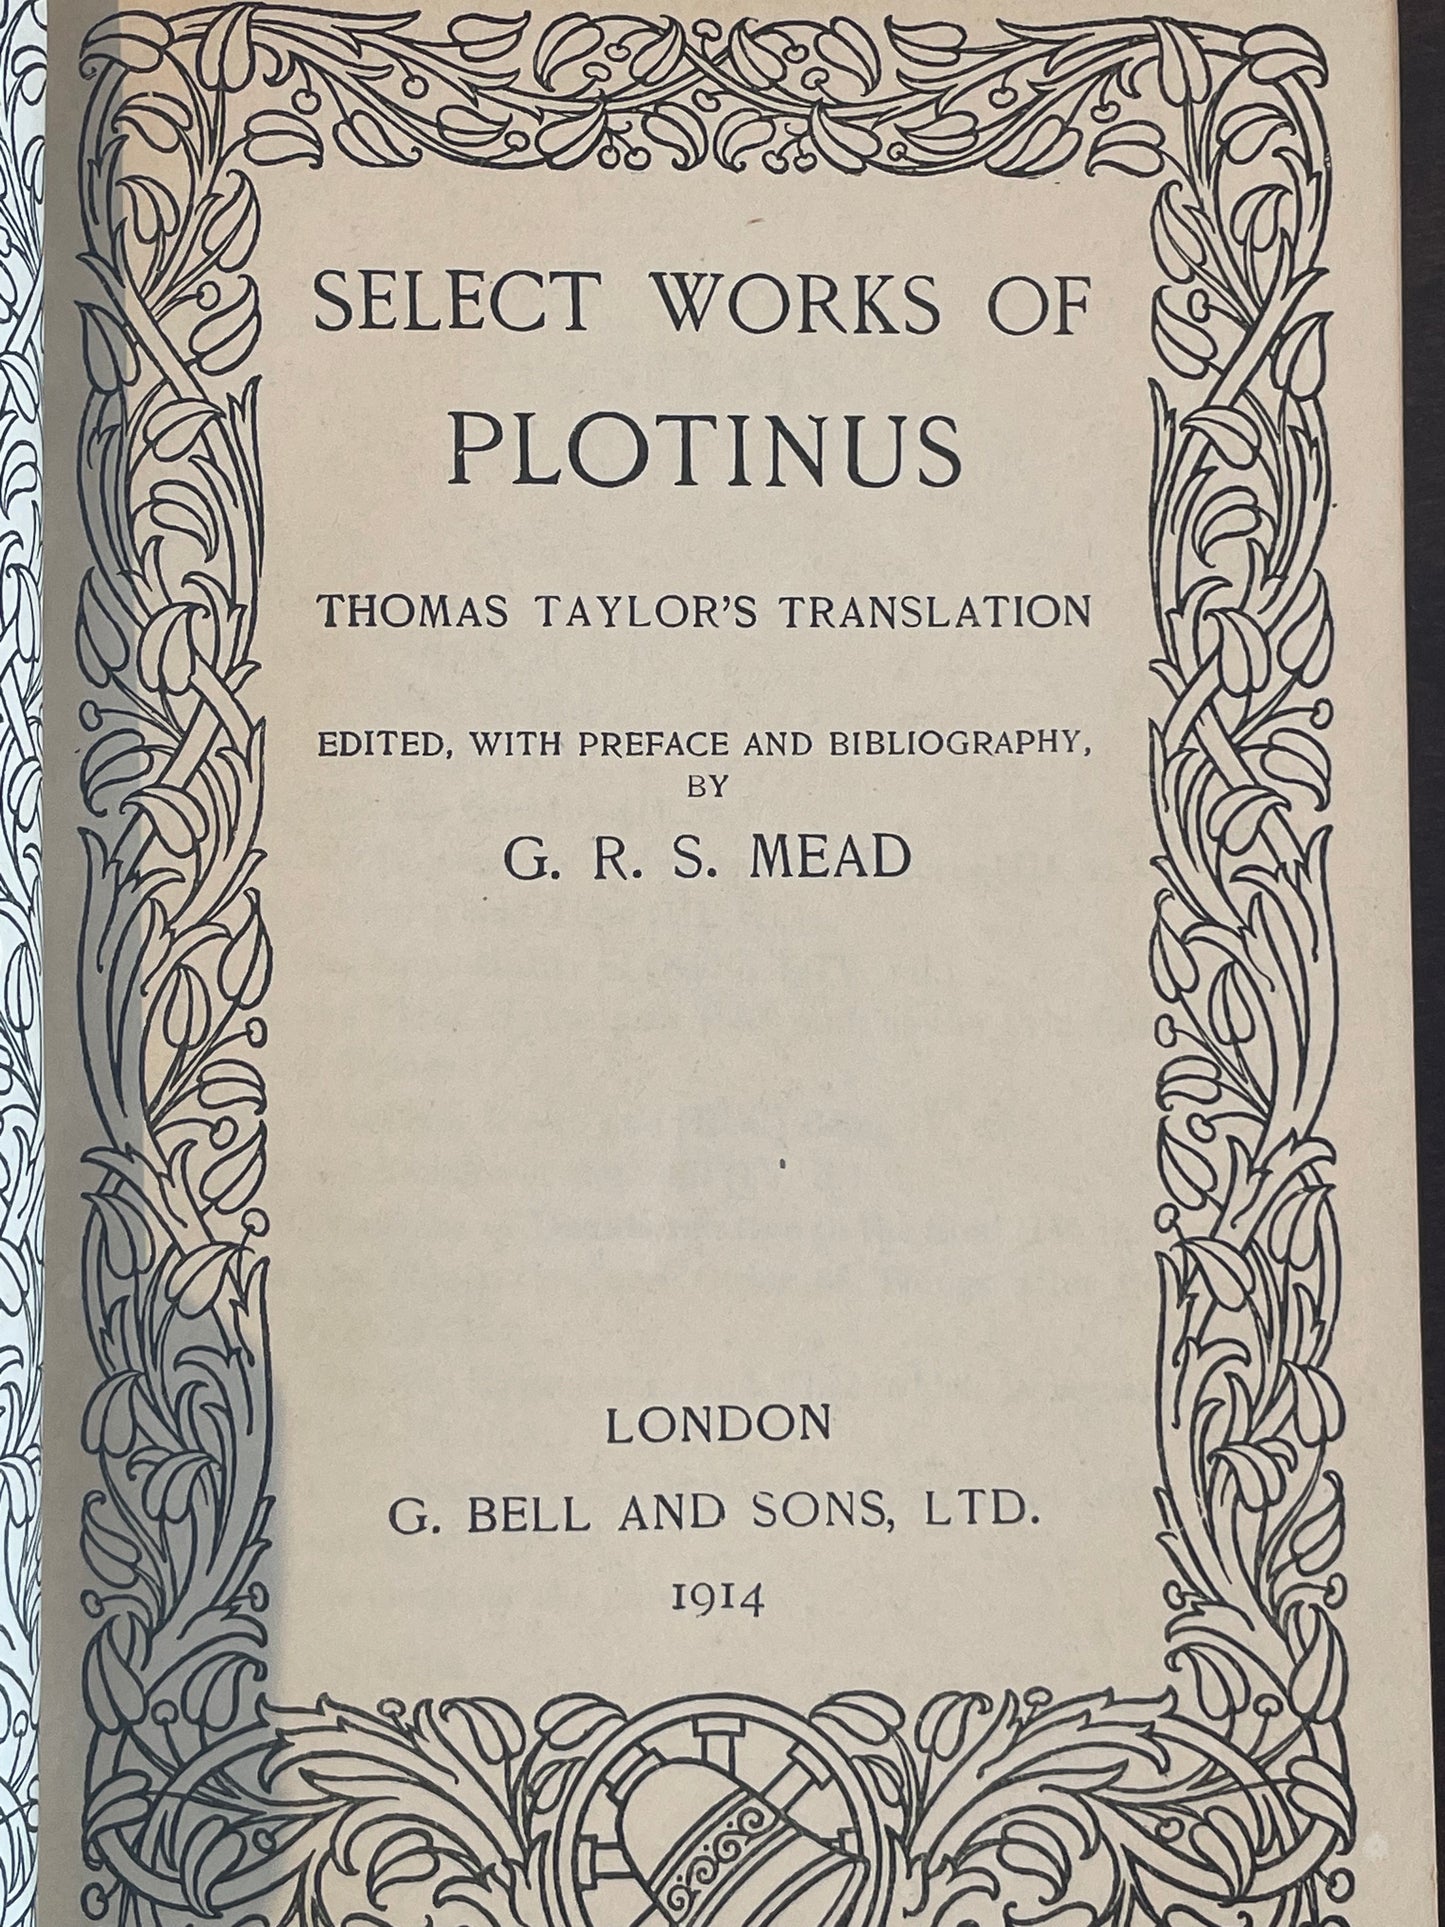 Select Works of Plotinus by Thomas Taylor